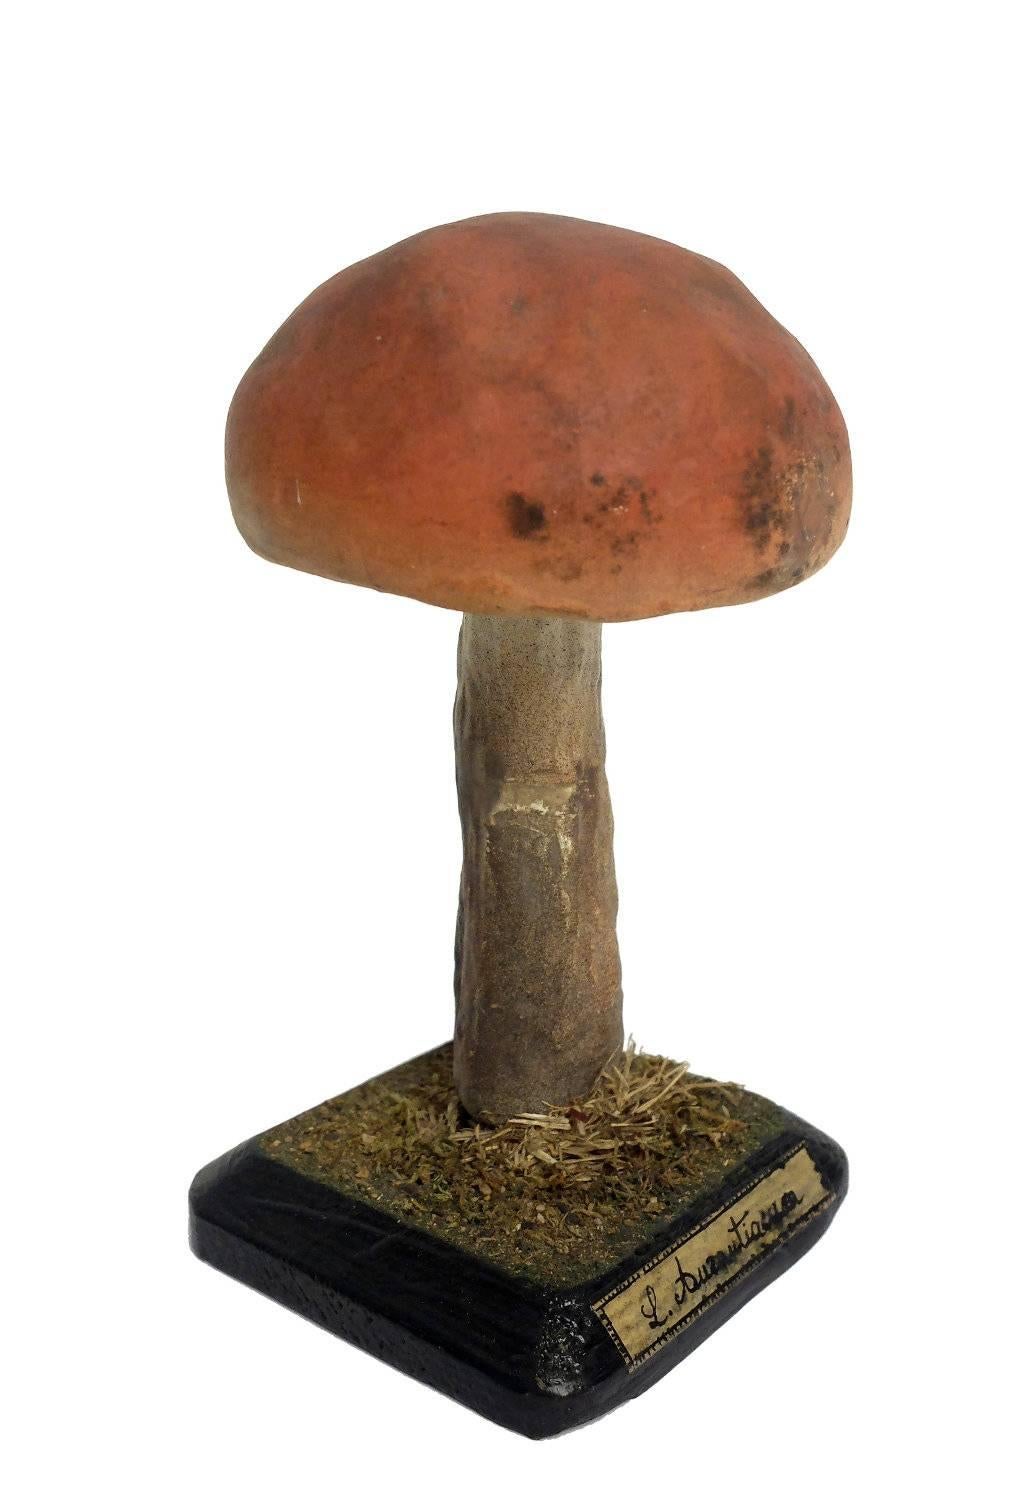 A model for pharmacy of mushroom specimen Aurantiacum. Made out of plaster watercolored. Square wooden black base with moss and hay. It shows on the front one label with the scientific name of the specimen handwritten with ink.